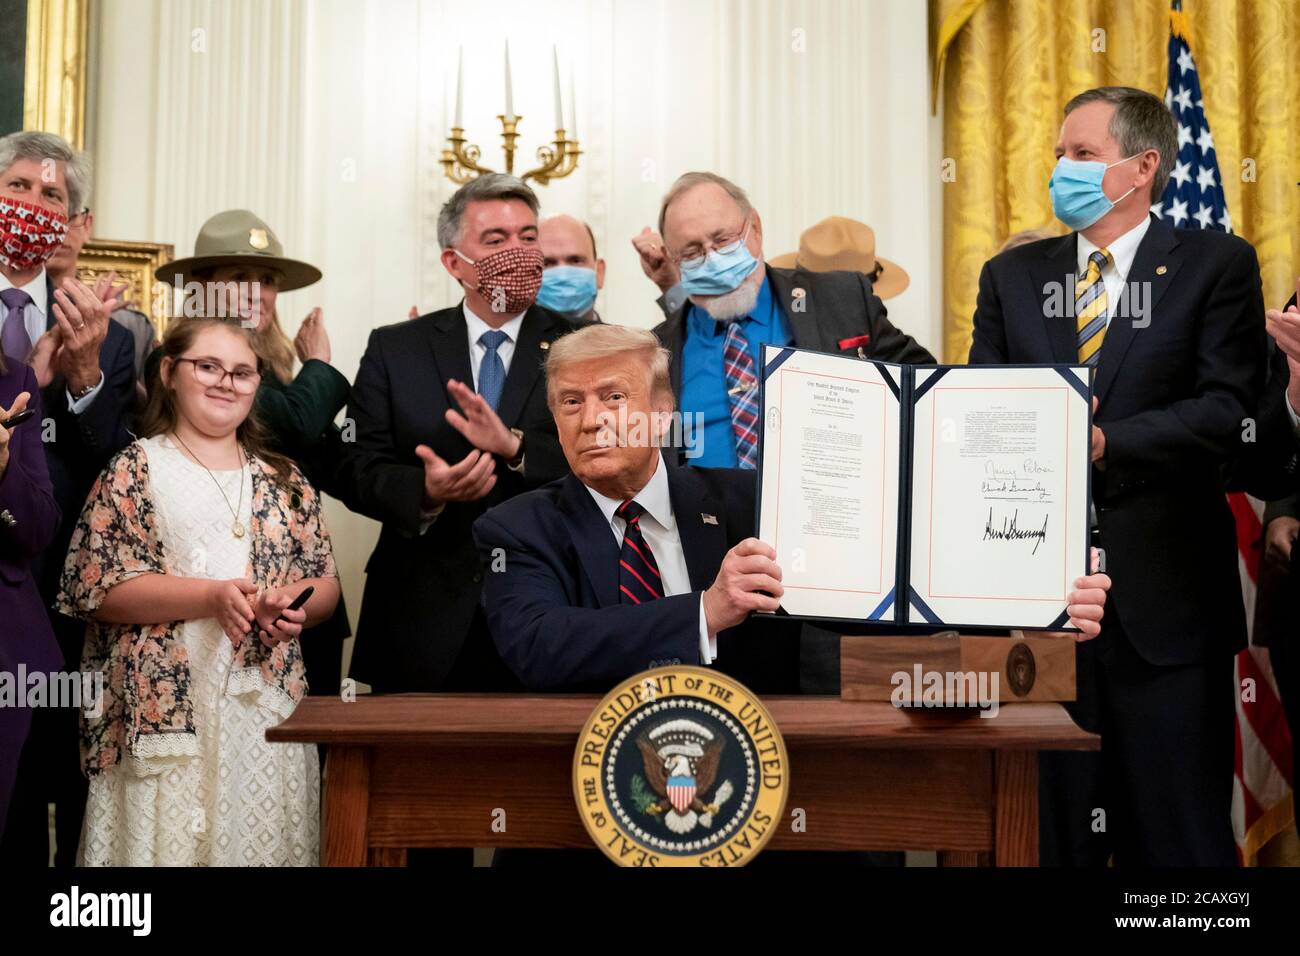 U.S. President Donald Trump holds up the signed Great American Outdoors Act during an event in the East Room of the White House August 4, 2020 in Washington, D.C. Stock Photo